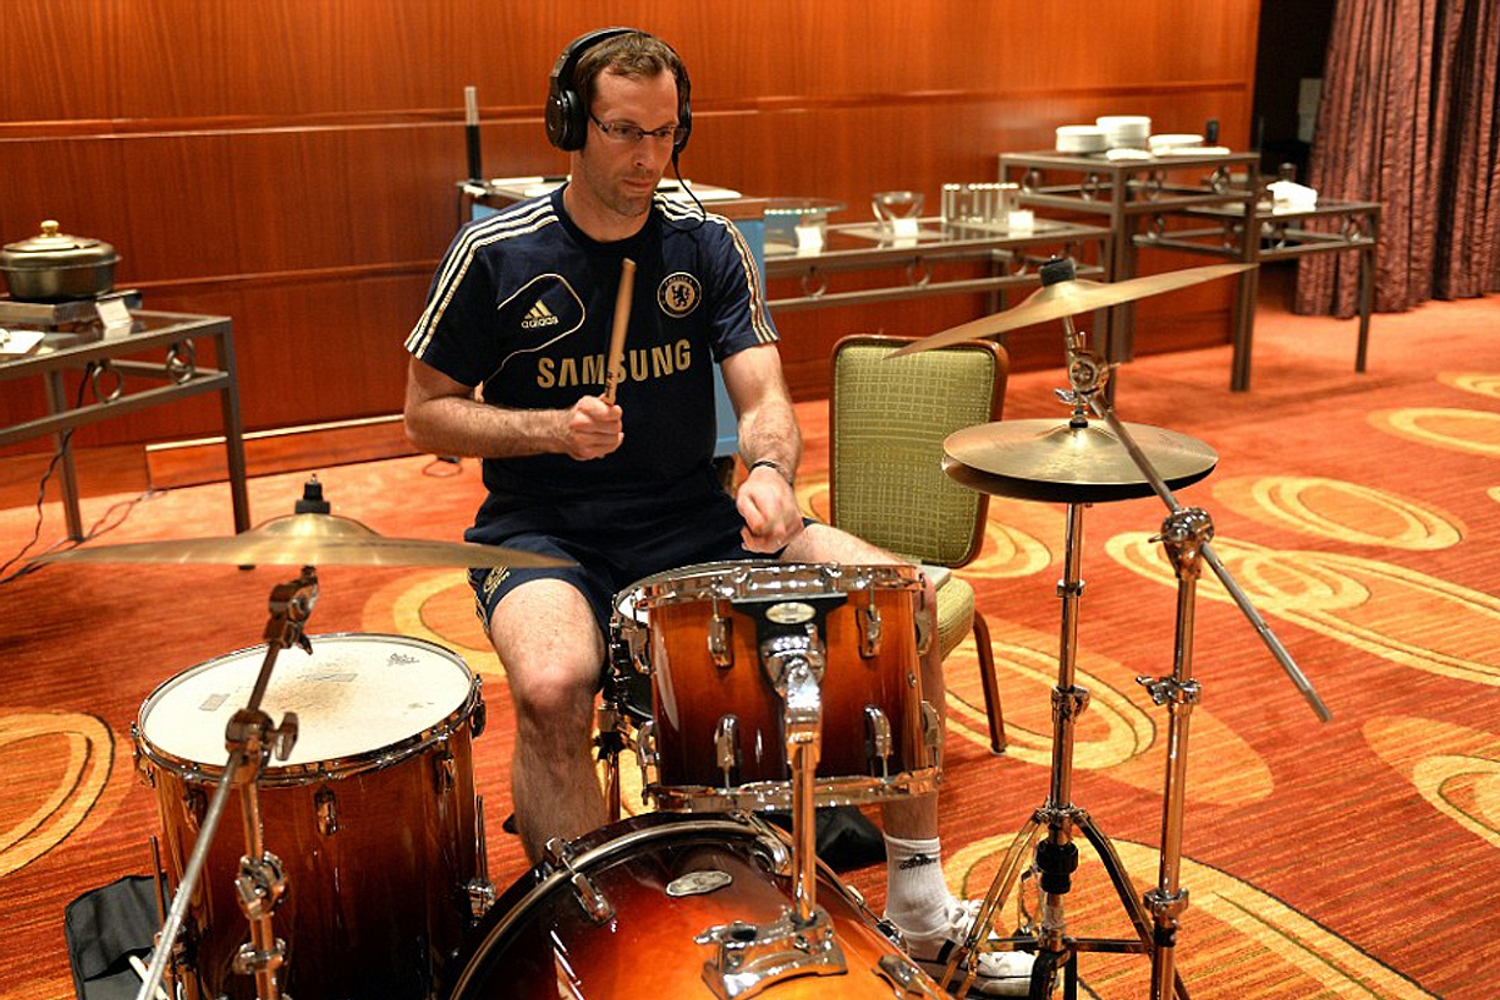 A guide to the majestic drumming of Petr Cech